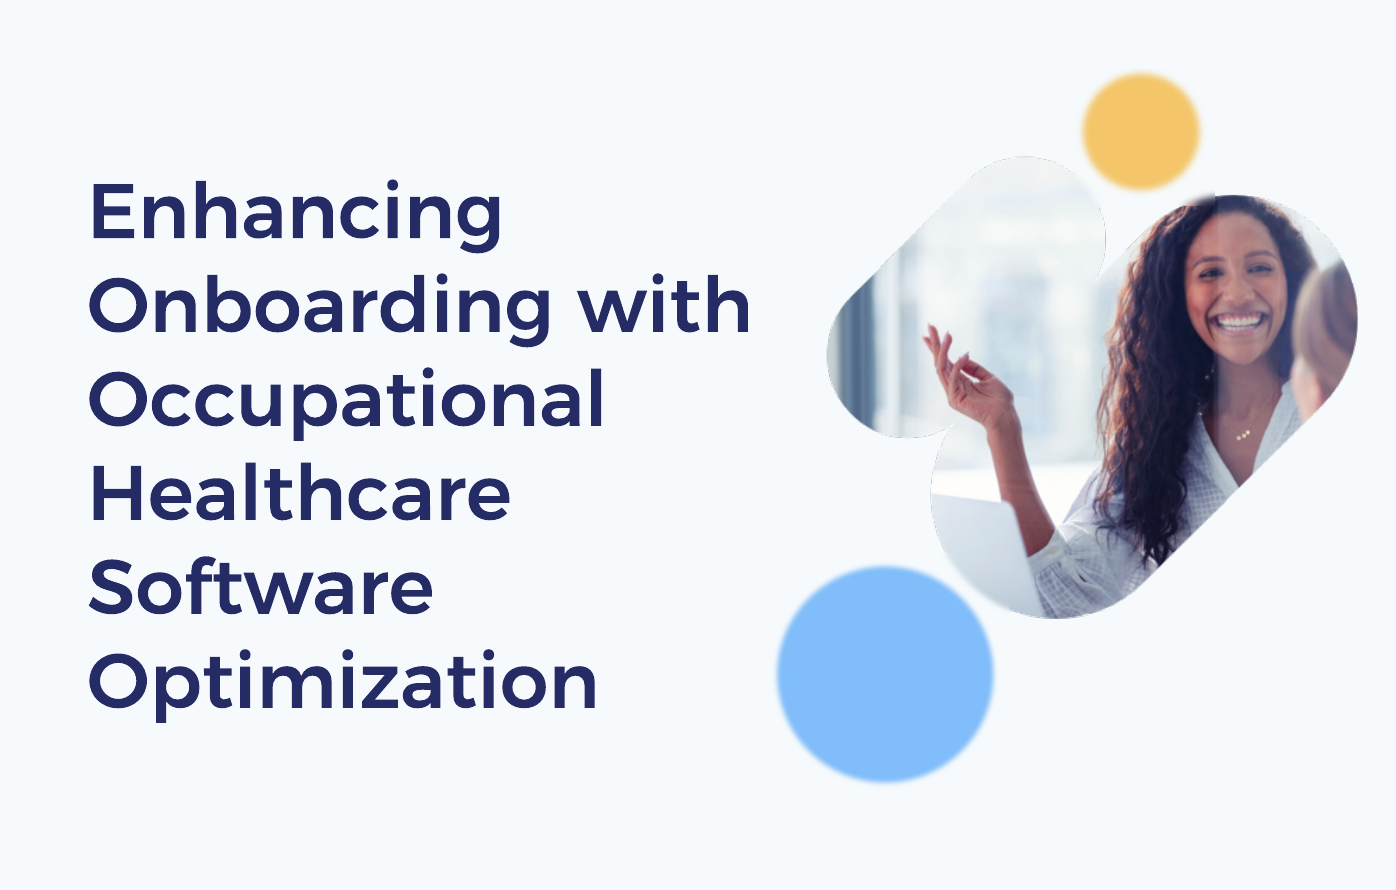 Enhancing Onboarding with Occupational Healthcare Software Optimization